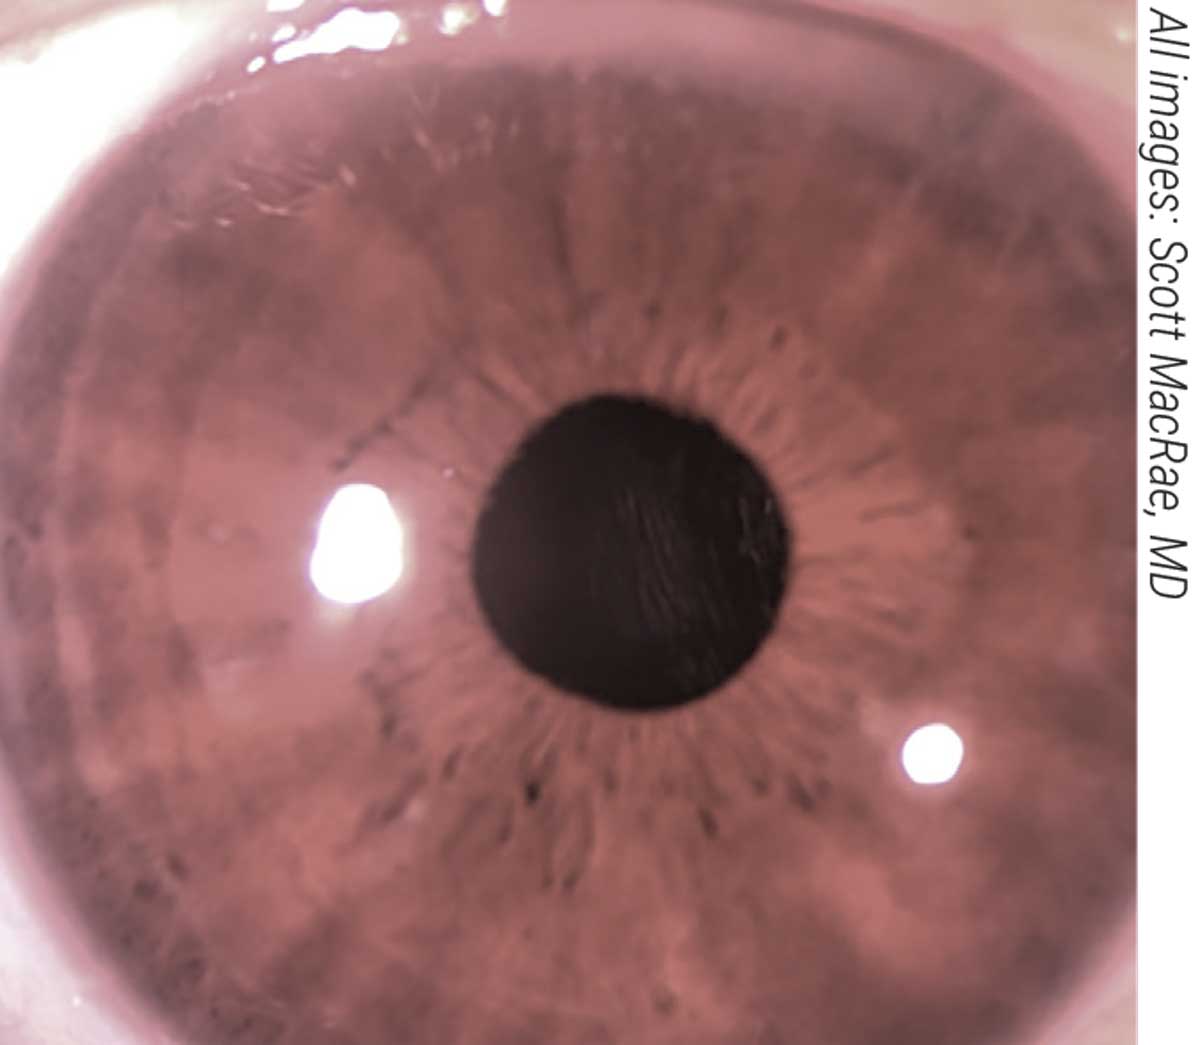 1/16 Ever wonder why Wilson disease causes Kayser-Fleischer rings to form  in the cornea? Let's explore the history, mechanism, and implications of -  Thread from Avraham Z. Cooper, MD @AvrahamCooperMD - Rattibha